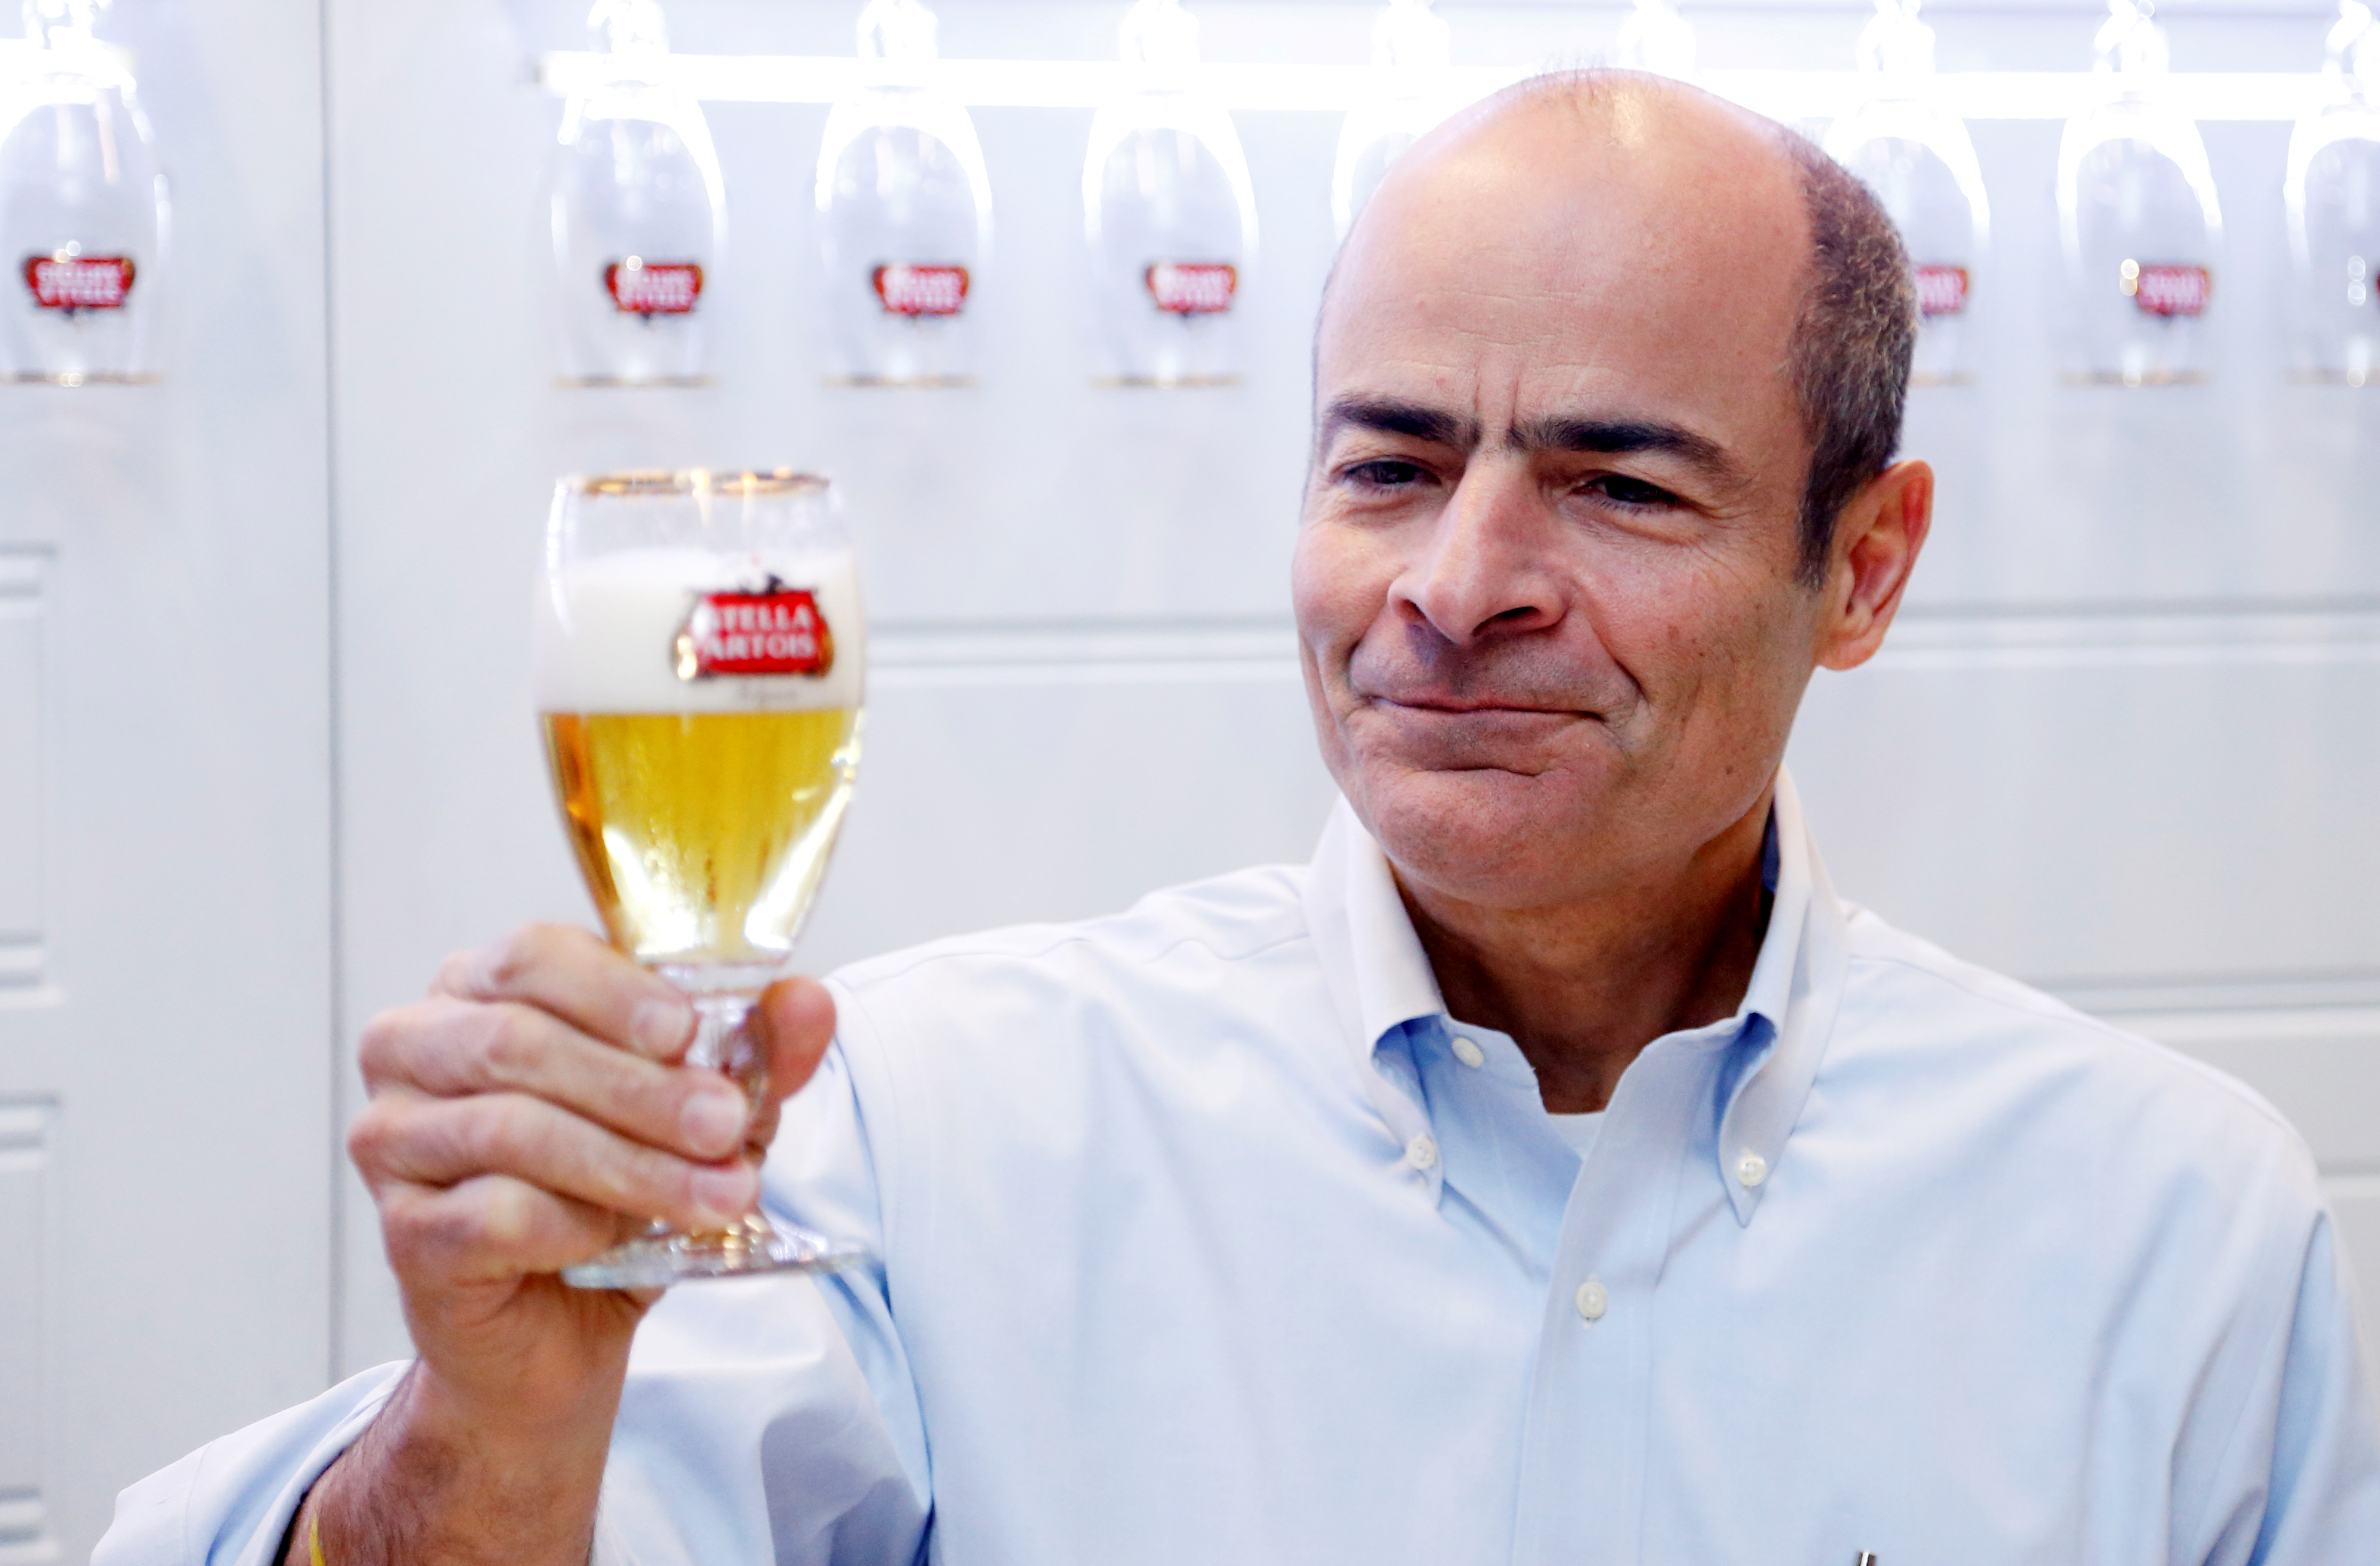 Anheuser-Busch InBev CEO Brito poses with a Stella Artois beer after a news conference in Leuven